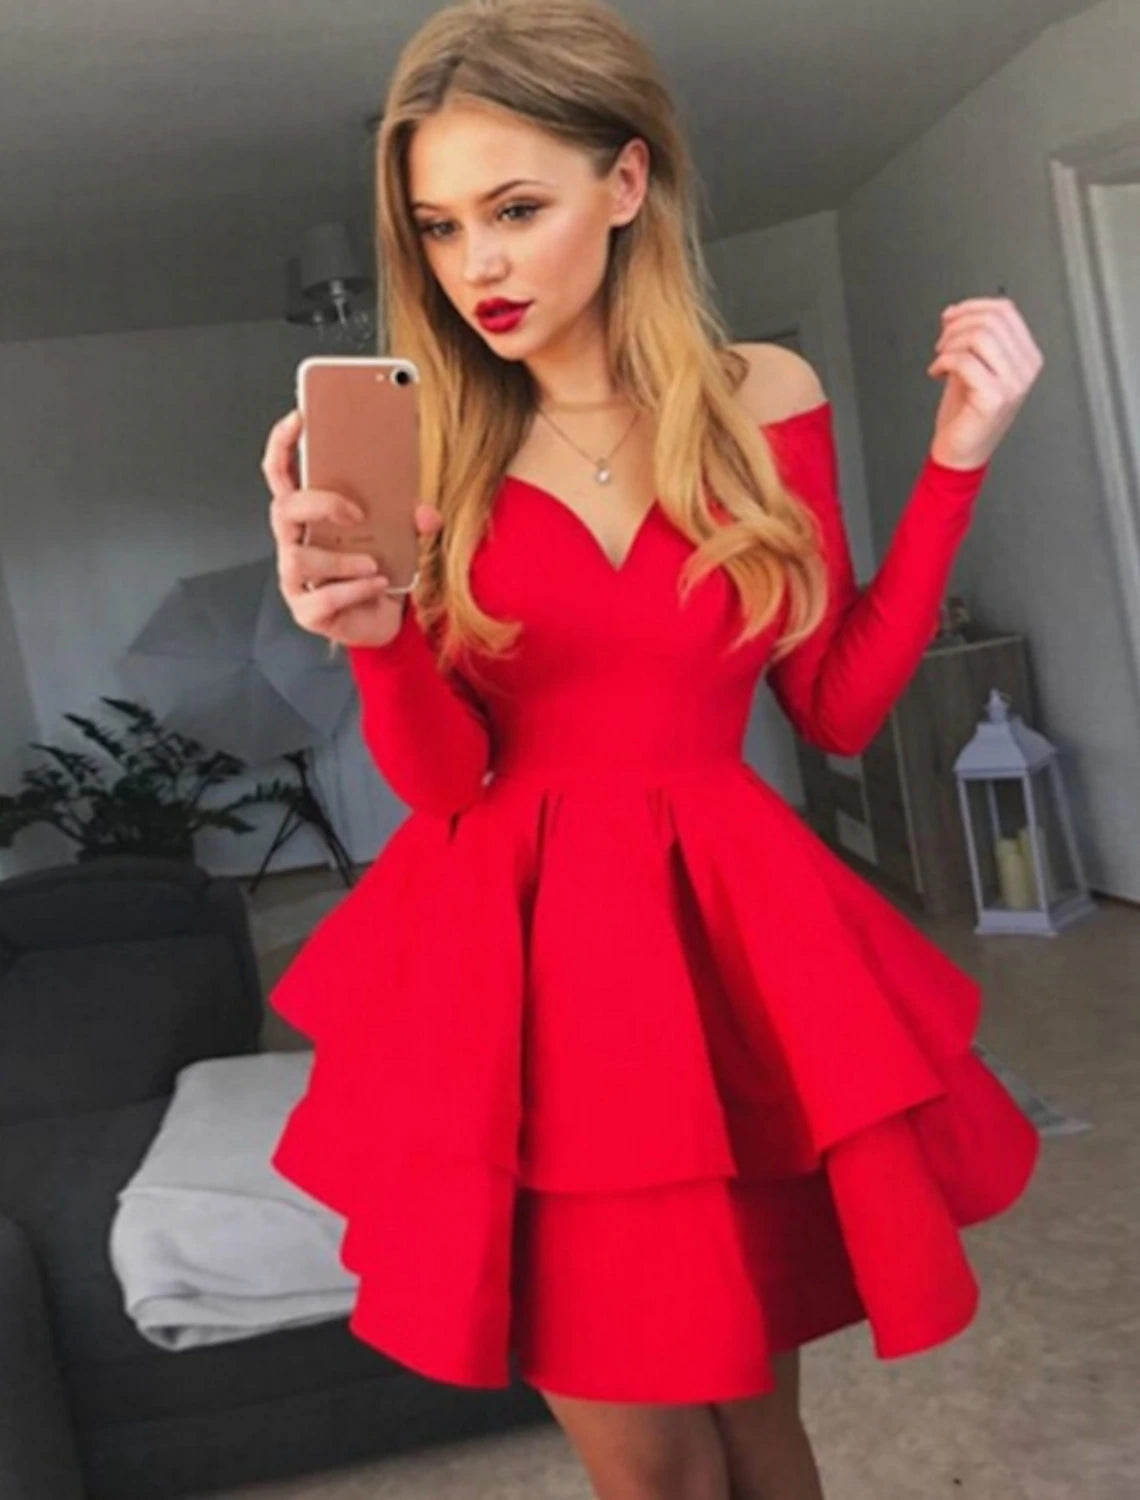 A-line Ruched Homecming Dresses Black Red White Long Sleeve Layered Tiered Short Dress Spring Summer Off Shoulder Hot Cocktail Party